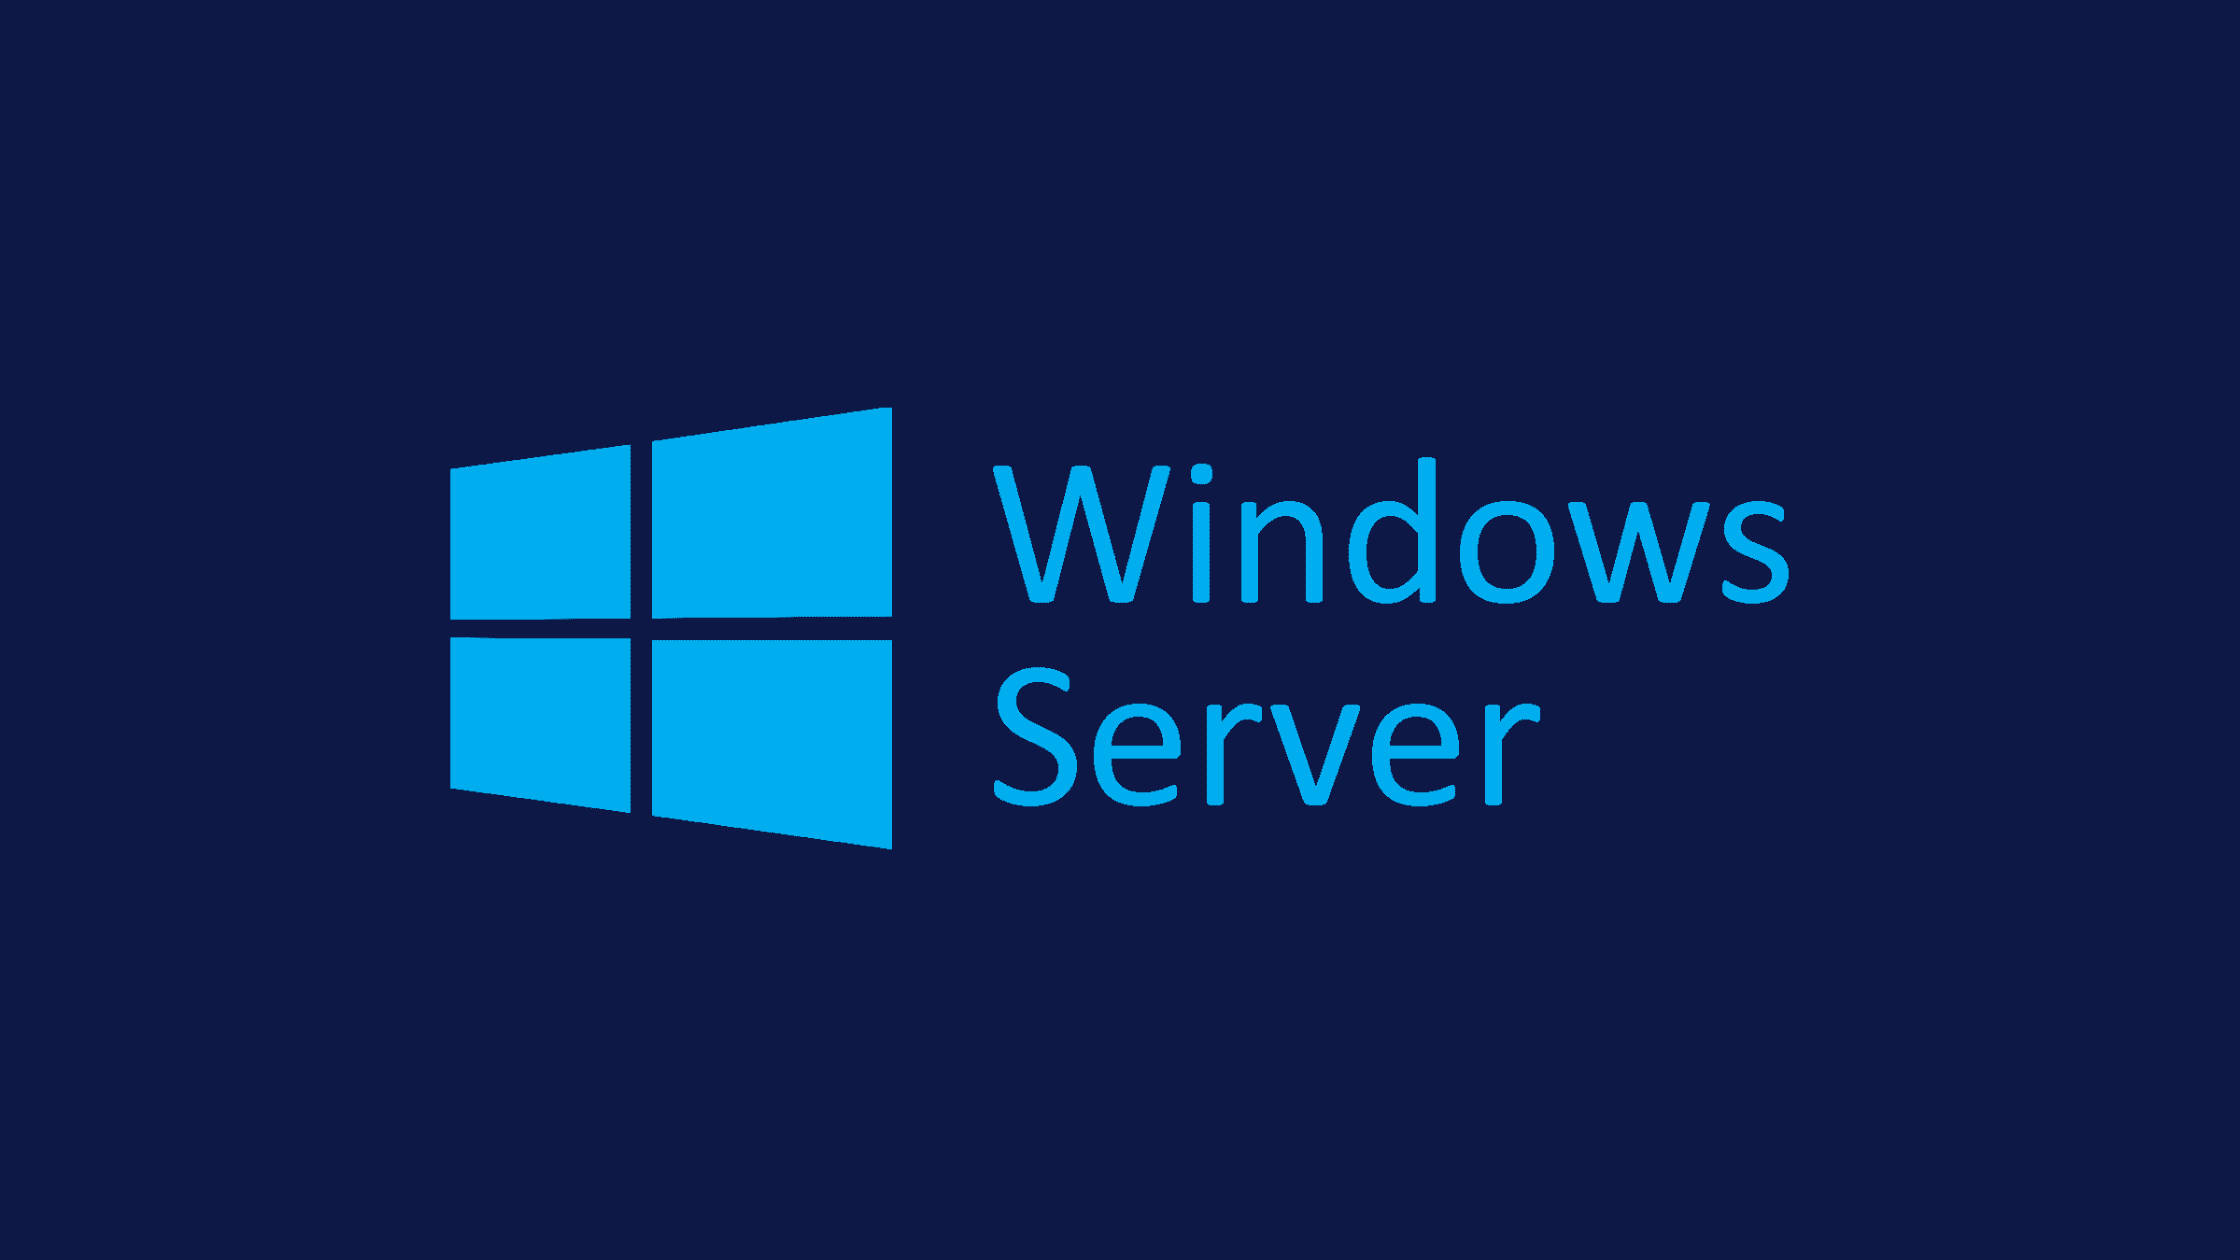 Step By Step Procedure To Install Windows Server 2016 On Vmware Workstation